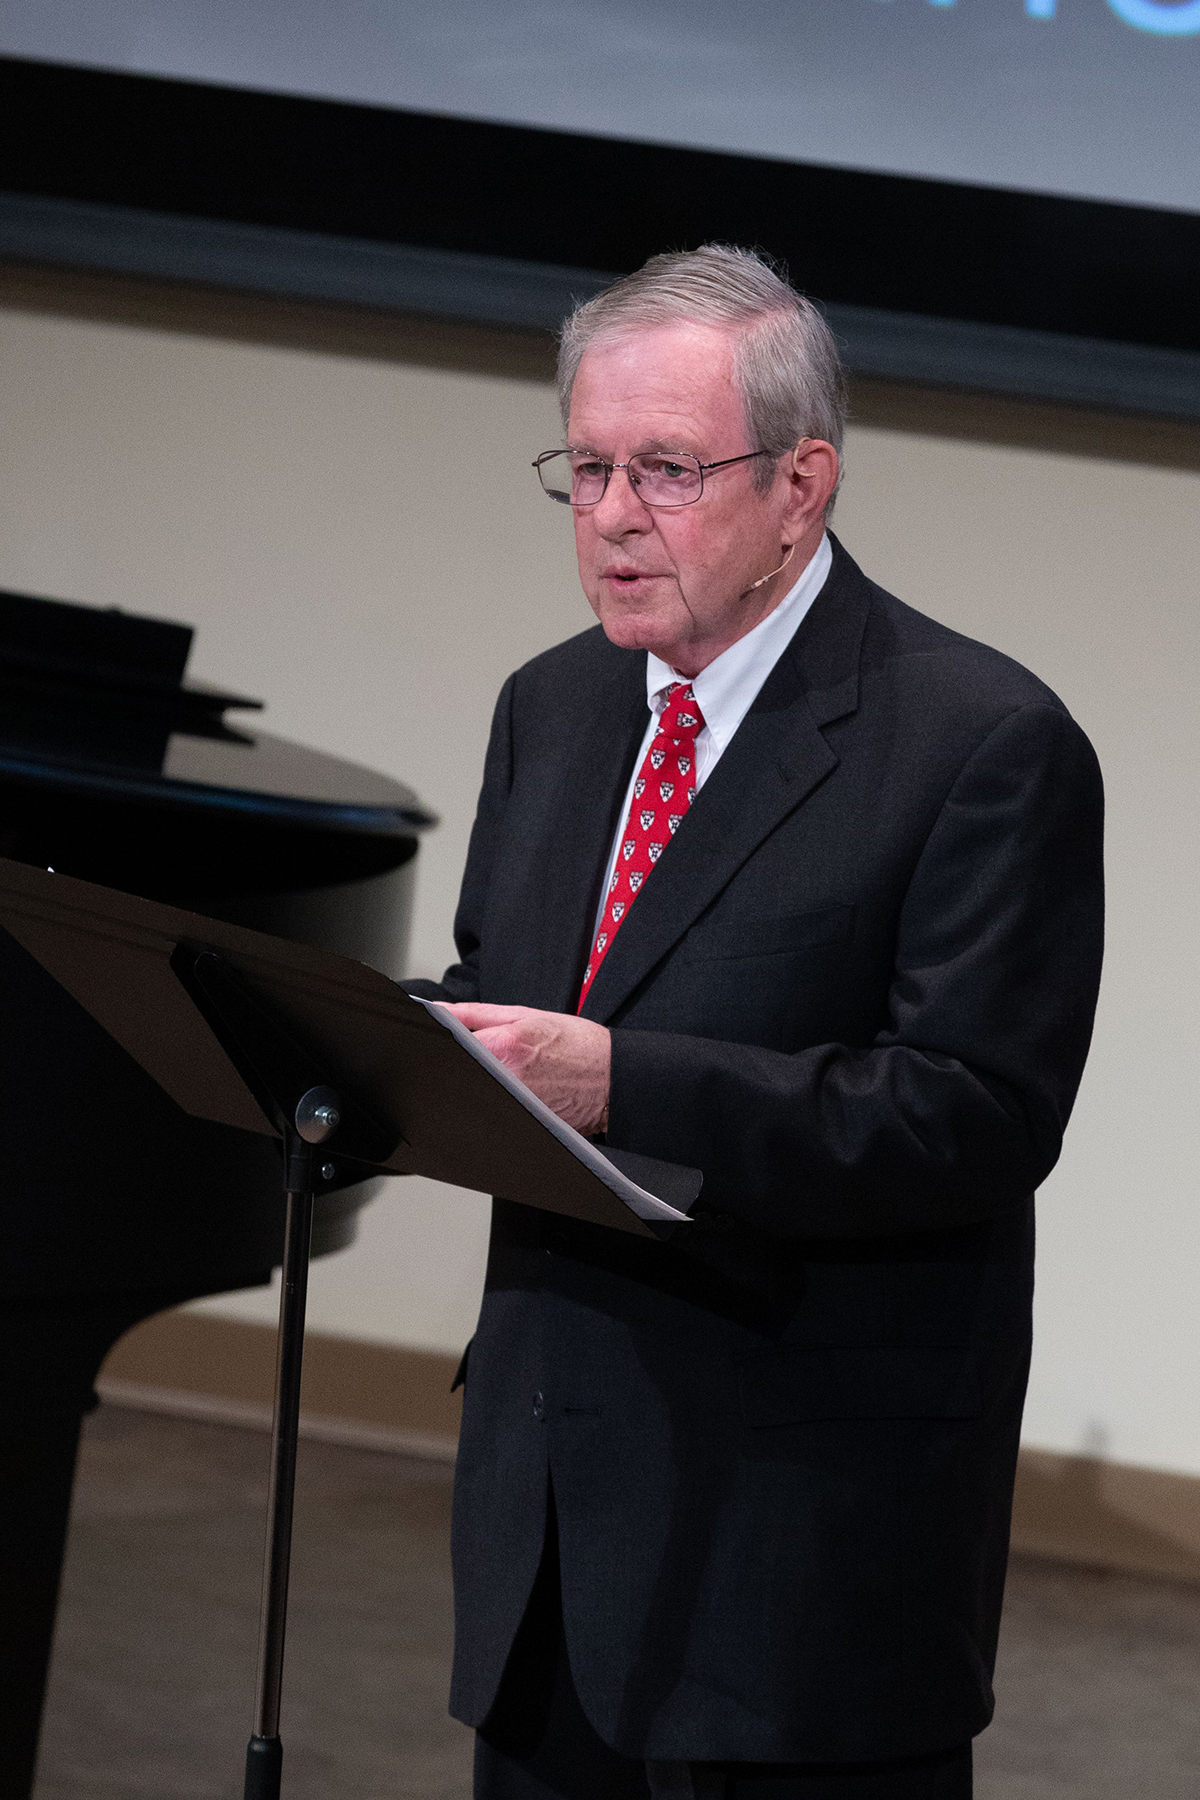 Charles Stoddard, a banker, philanthropist and founder of Grand Angels, spoke on the topic of service at the Celebration of Community Engagement, photo credit Julia Viniczay, University Communication student photographer